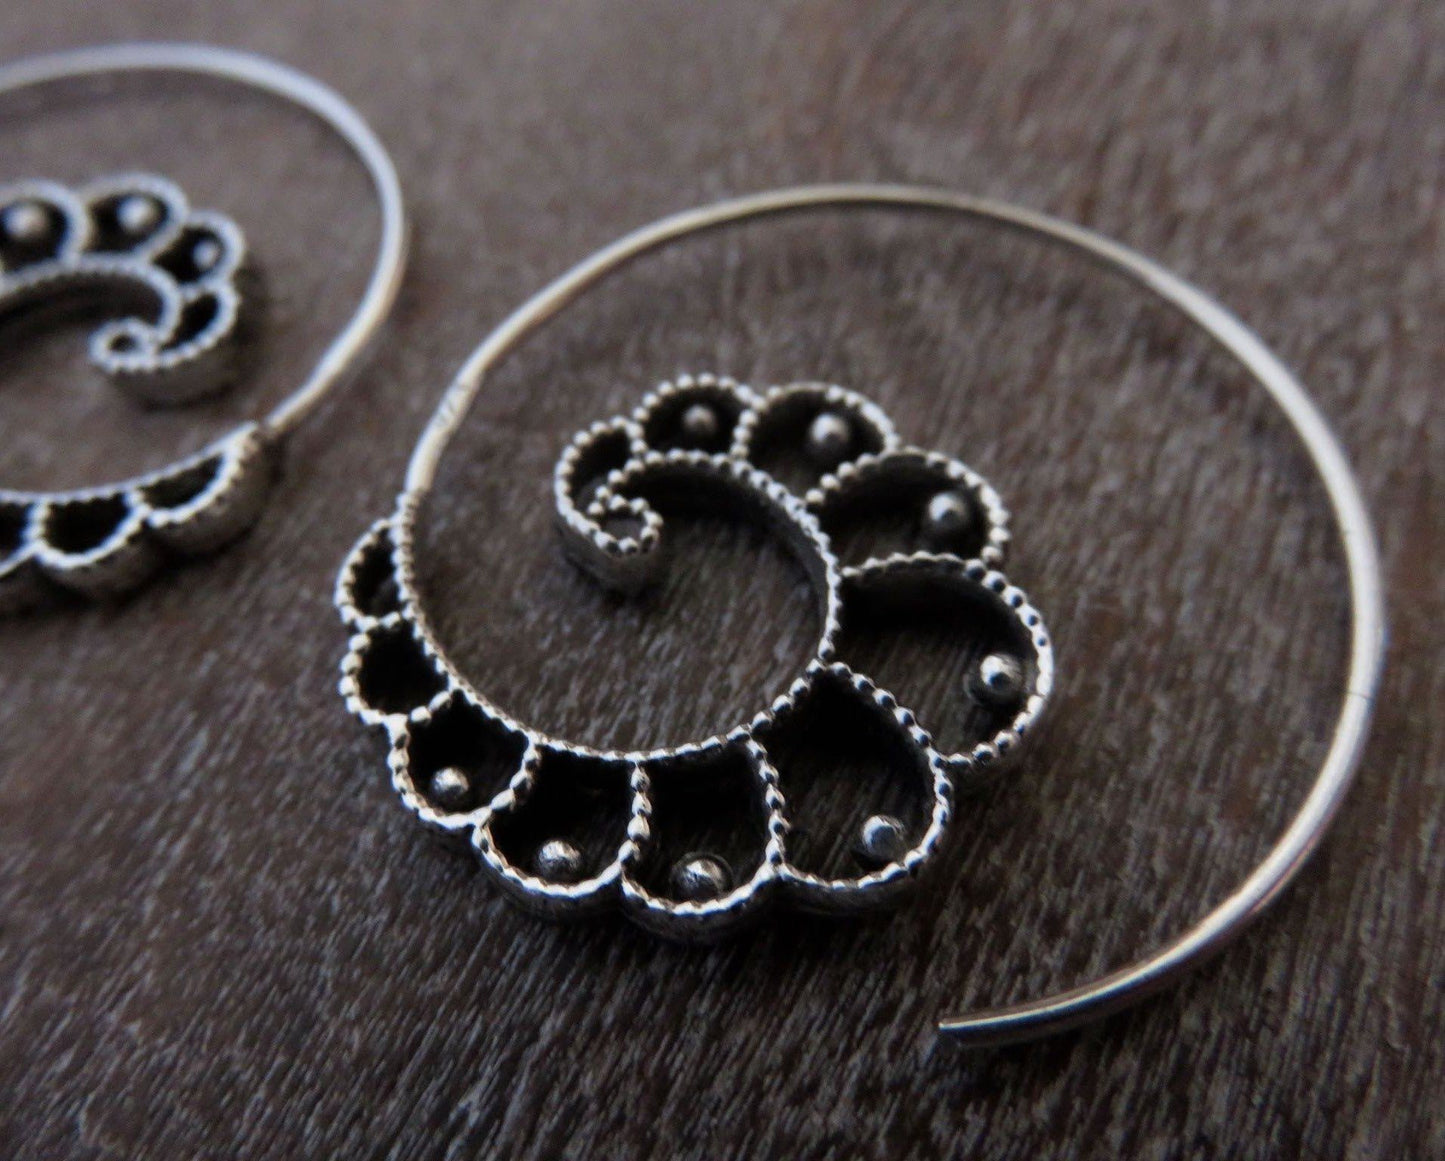 Spiral earrings with dot pattern made of silver 